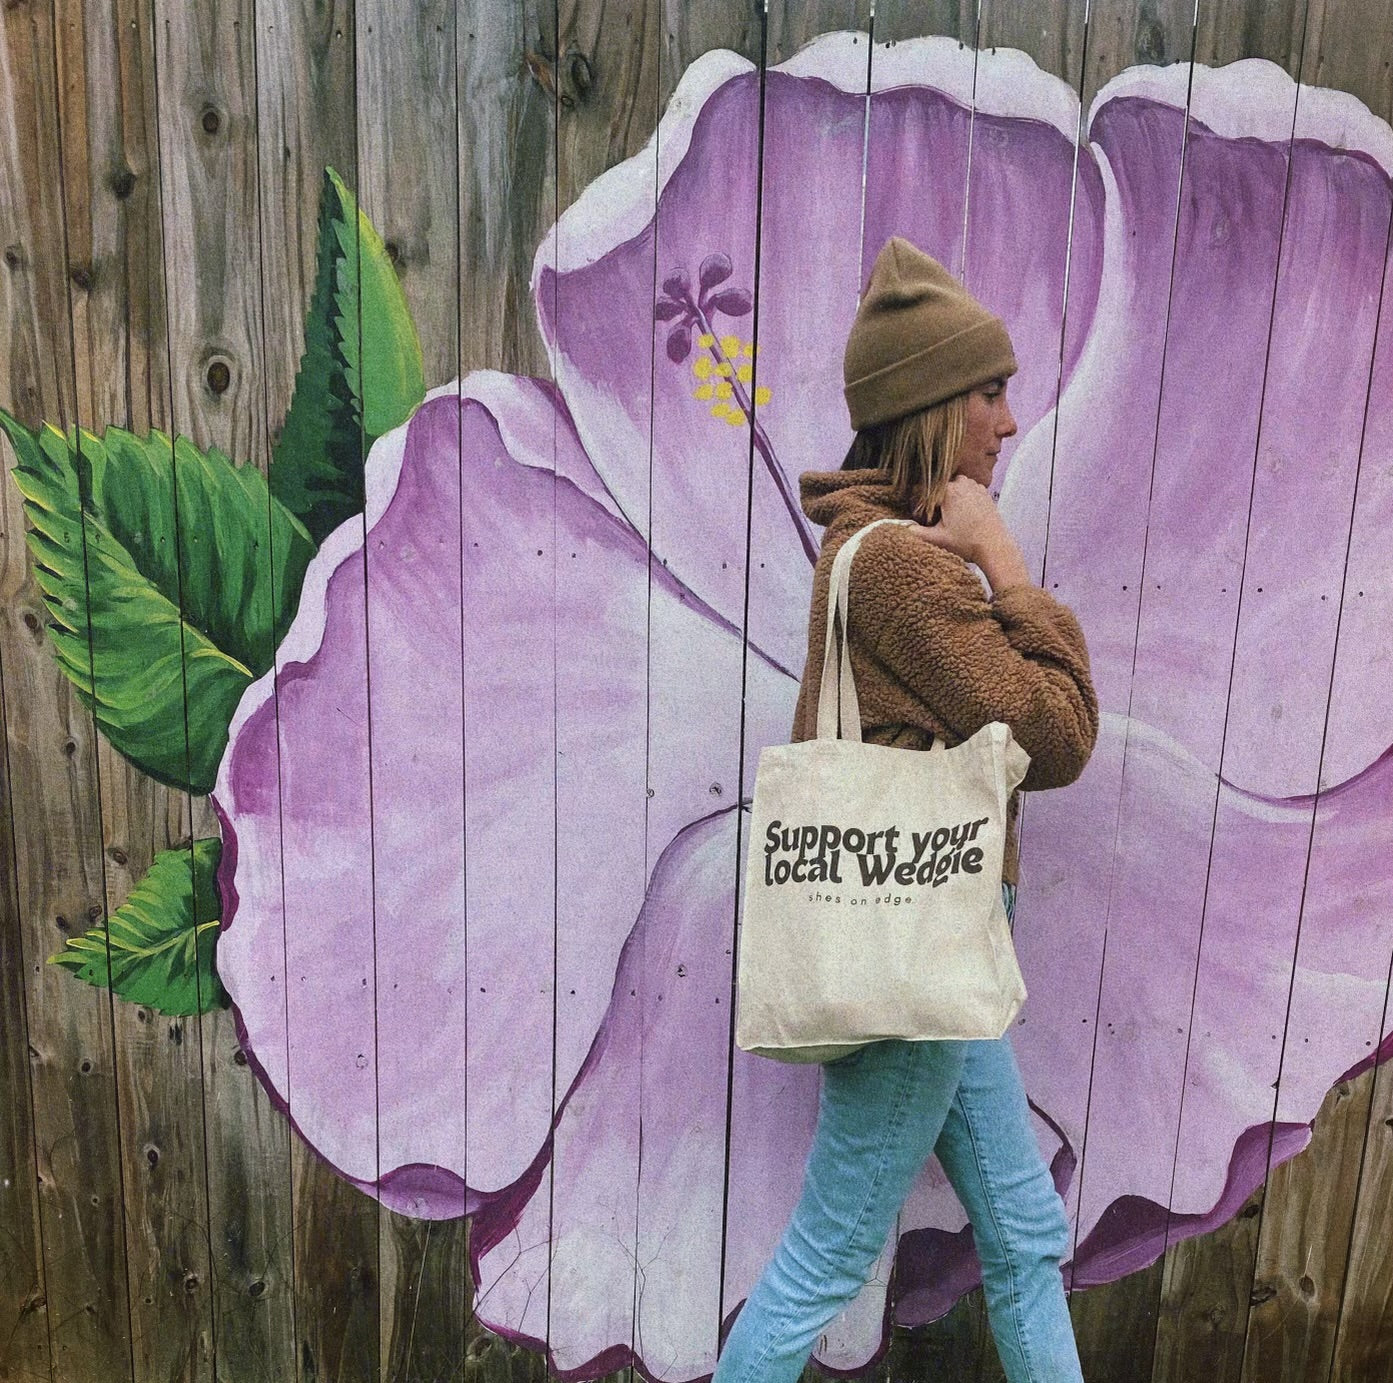 This image depicts a woman in a taupe beanie and jacket carrying a cream tote bag with brown writing that says "Support your local Wedgie shes on edge." The bag is being walked in front of a mural of a purple tropical flower. The woman is wearing jeans and has short, dirty-brown hair.